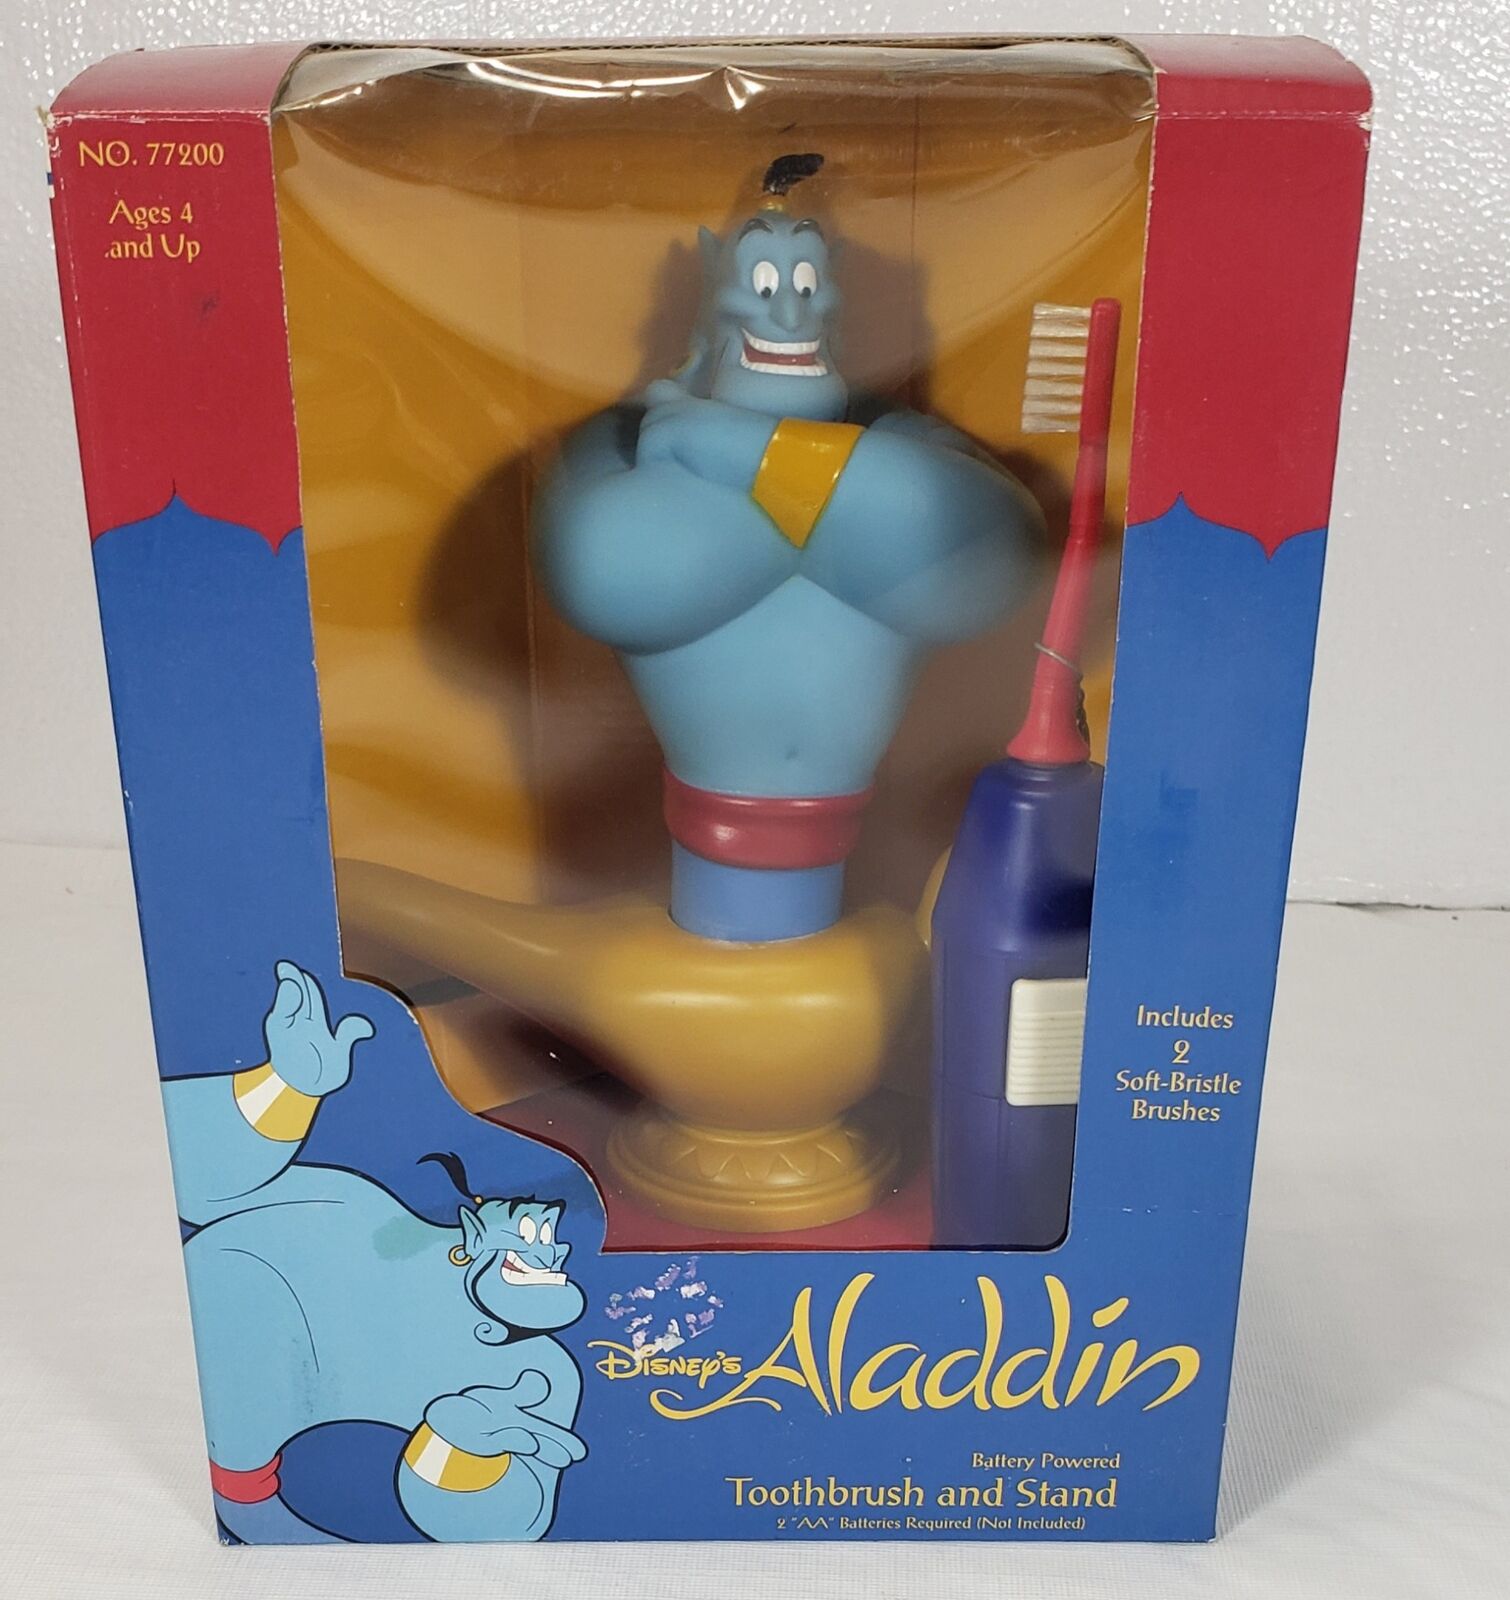 VINTAGE DISNEY ALADDIN GENIE TOOTHBRUSH AND STAND NEW IN BOX 1993 JANEX 